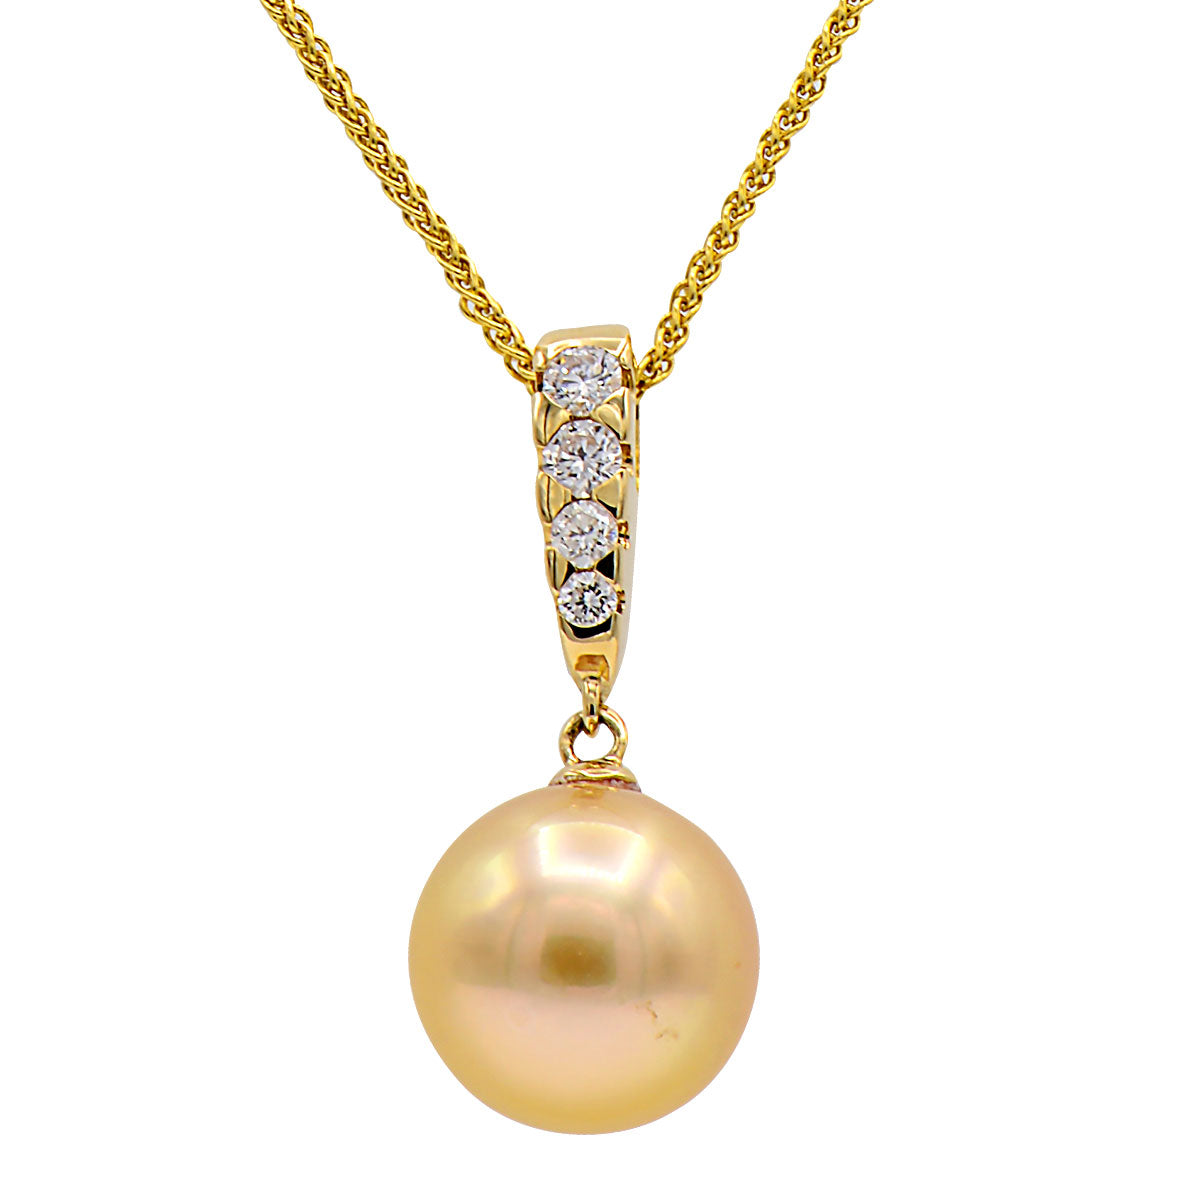 18KY Golden South Sea Pearl Pendant, 11-12mm